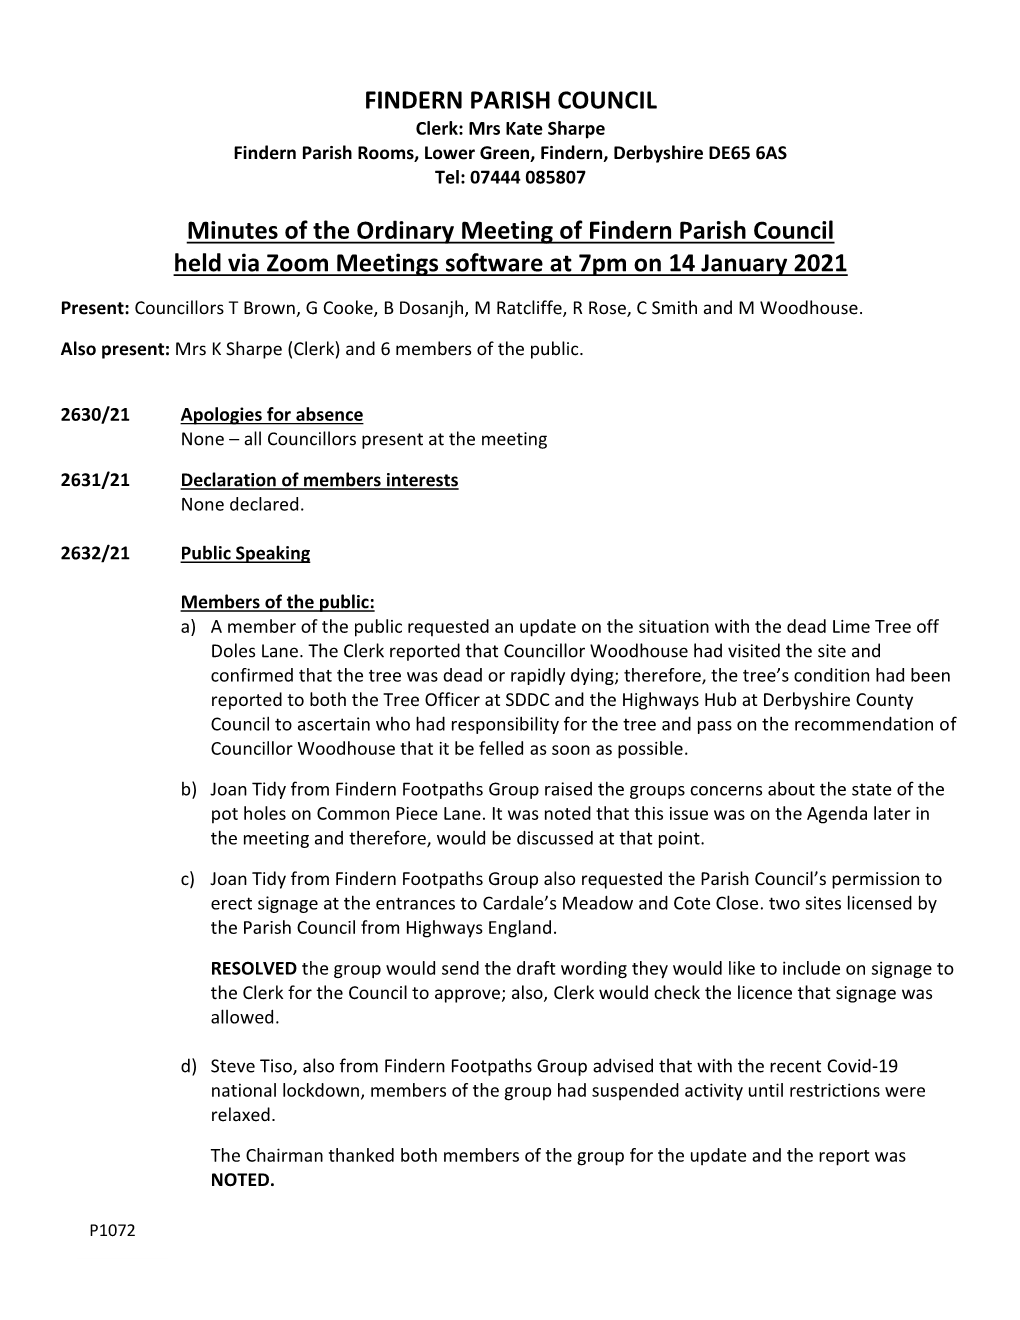 Minutes of the Ordinary Meeting of Findern Parish Council Held Via Zoom Meetings Software at 7Pm on 14 January 2021